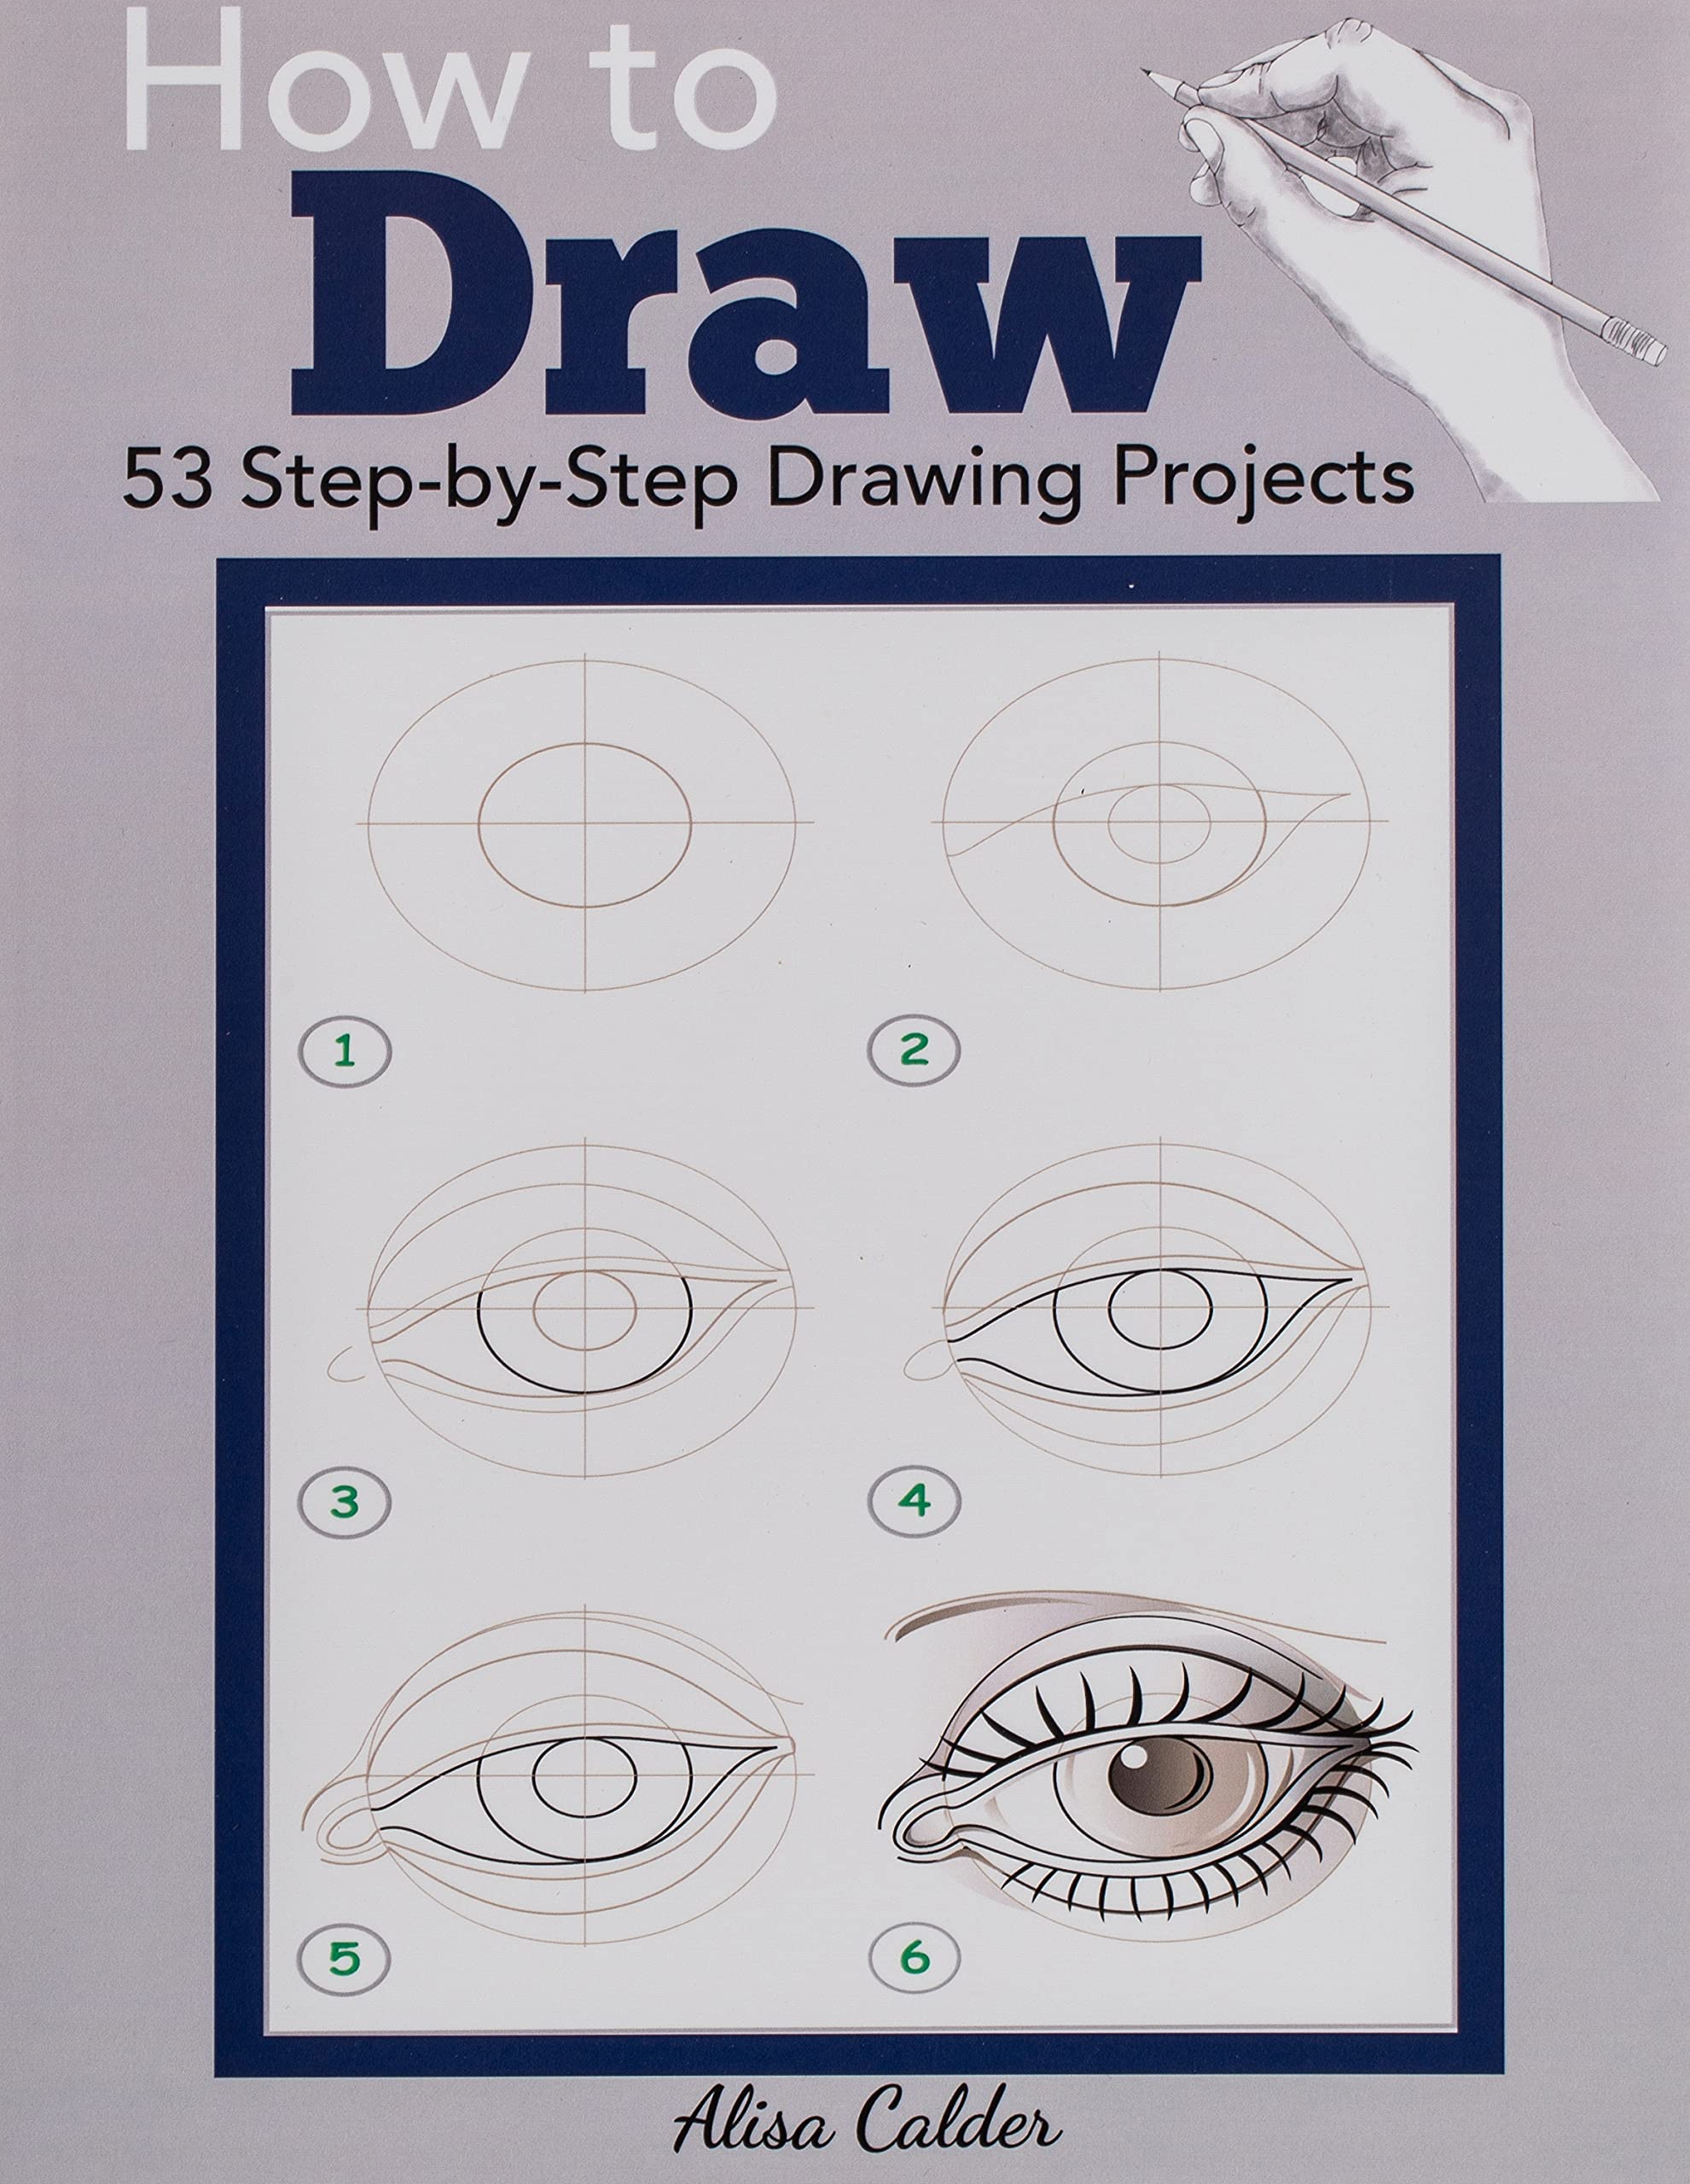 How to Draw - 53 Step By Step Drawing Projects